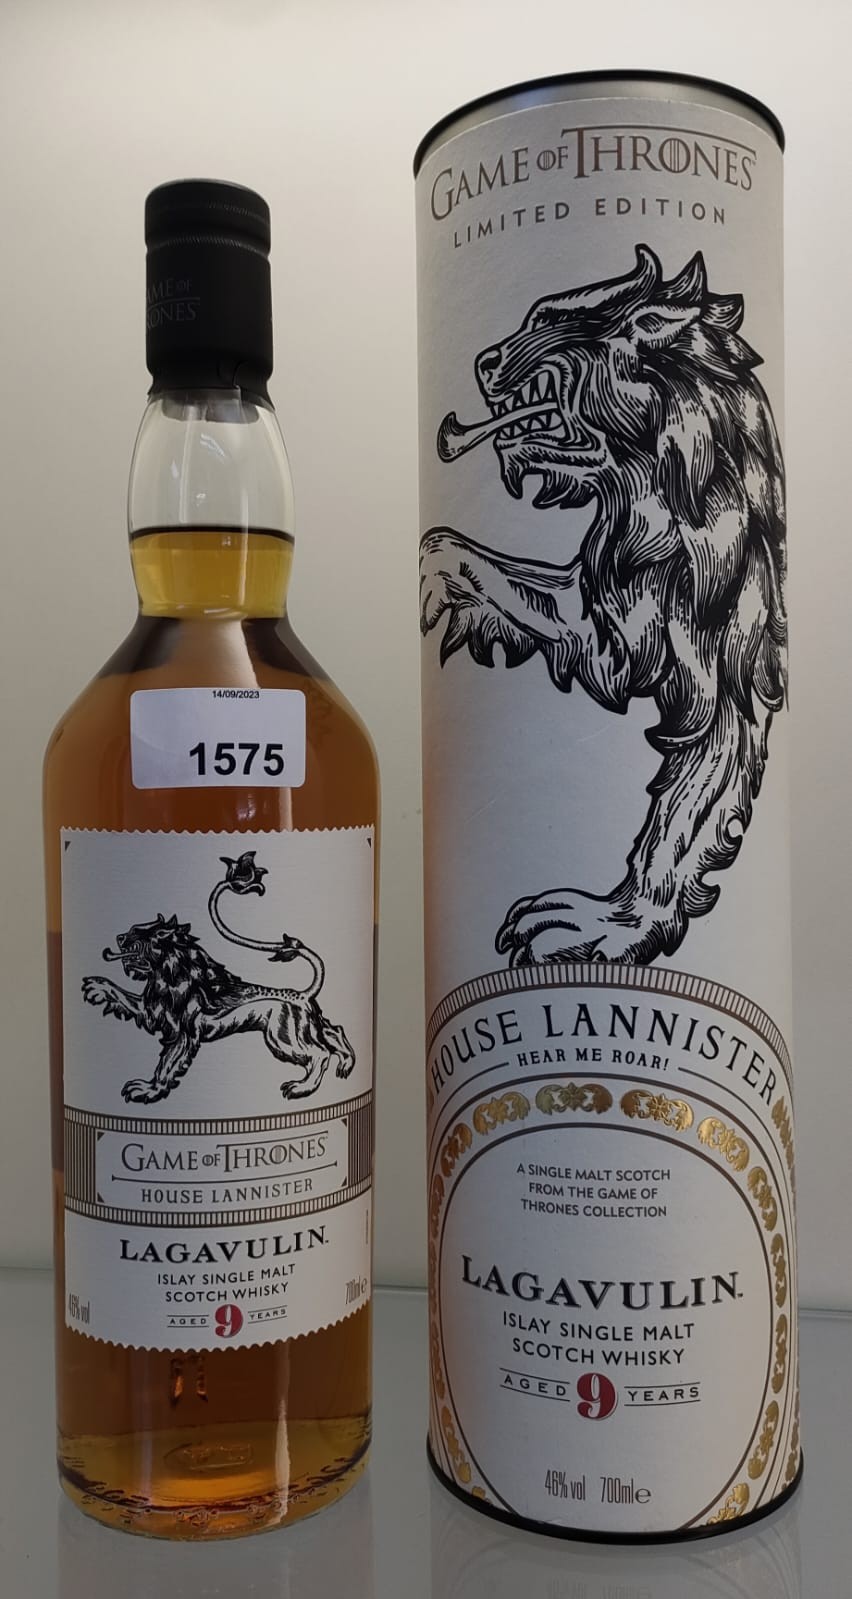 Game of Thrones Limited edition 'House Lannister' Lagavulin Islay Single Malt Scotch Whisky, aged